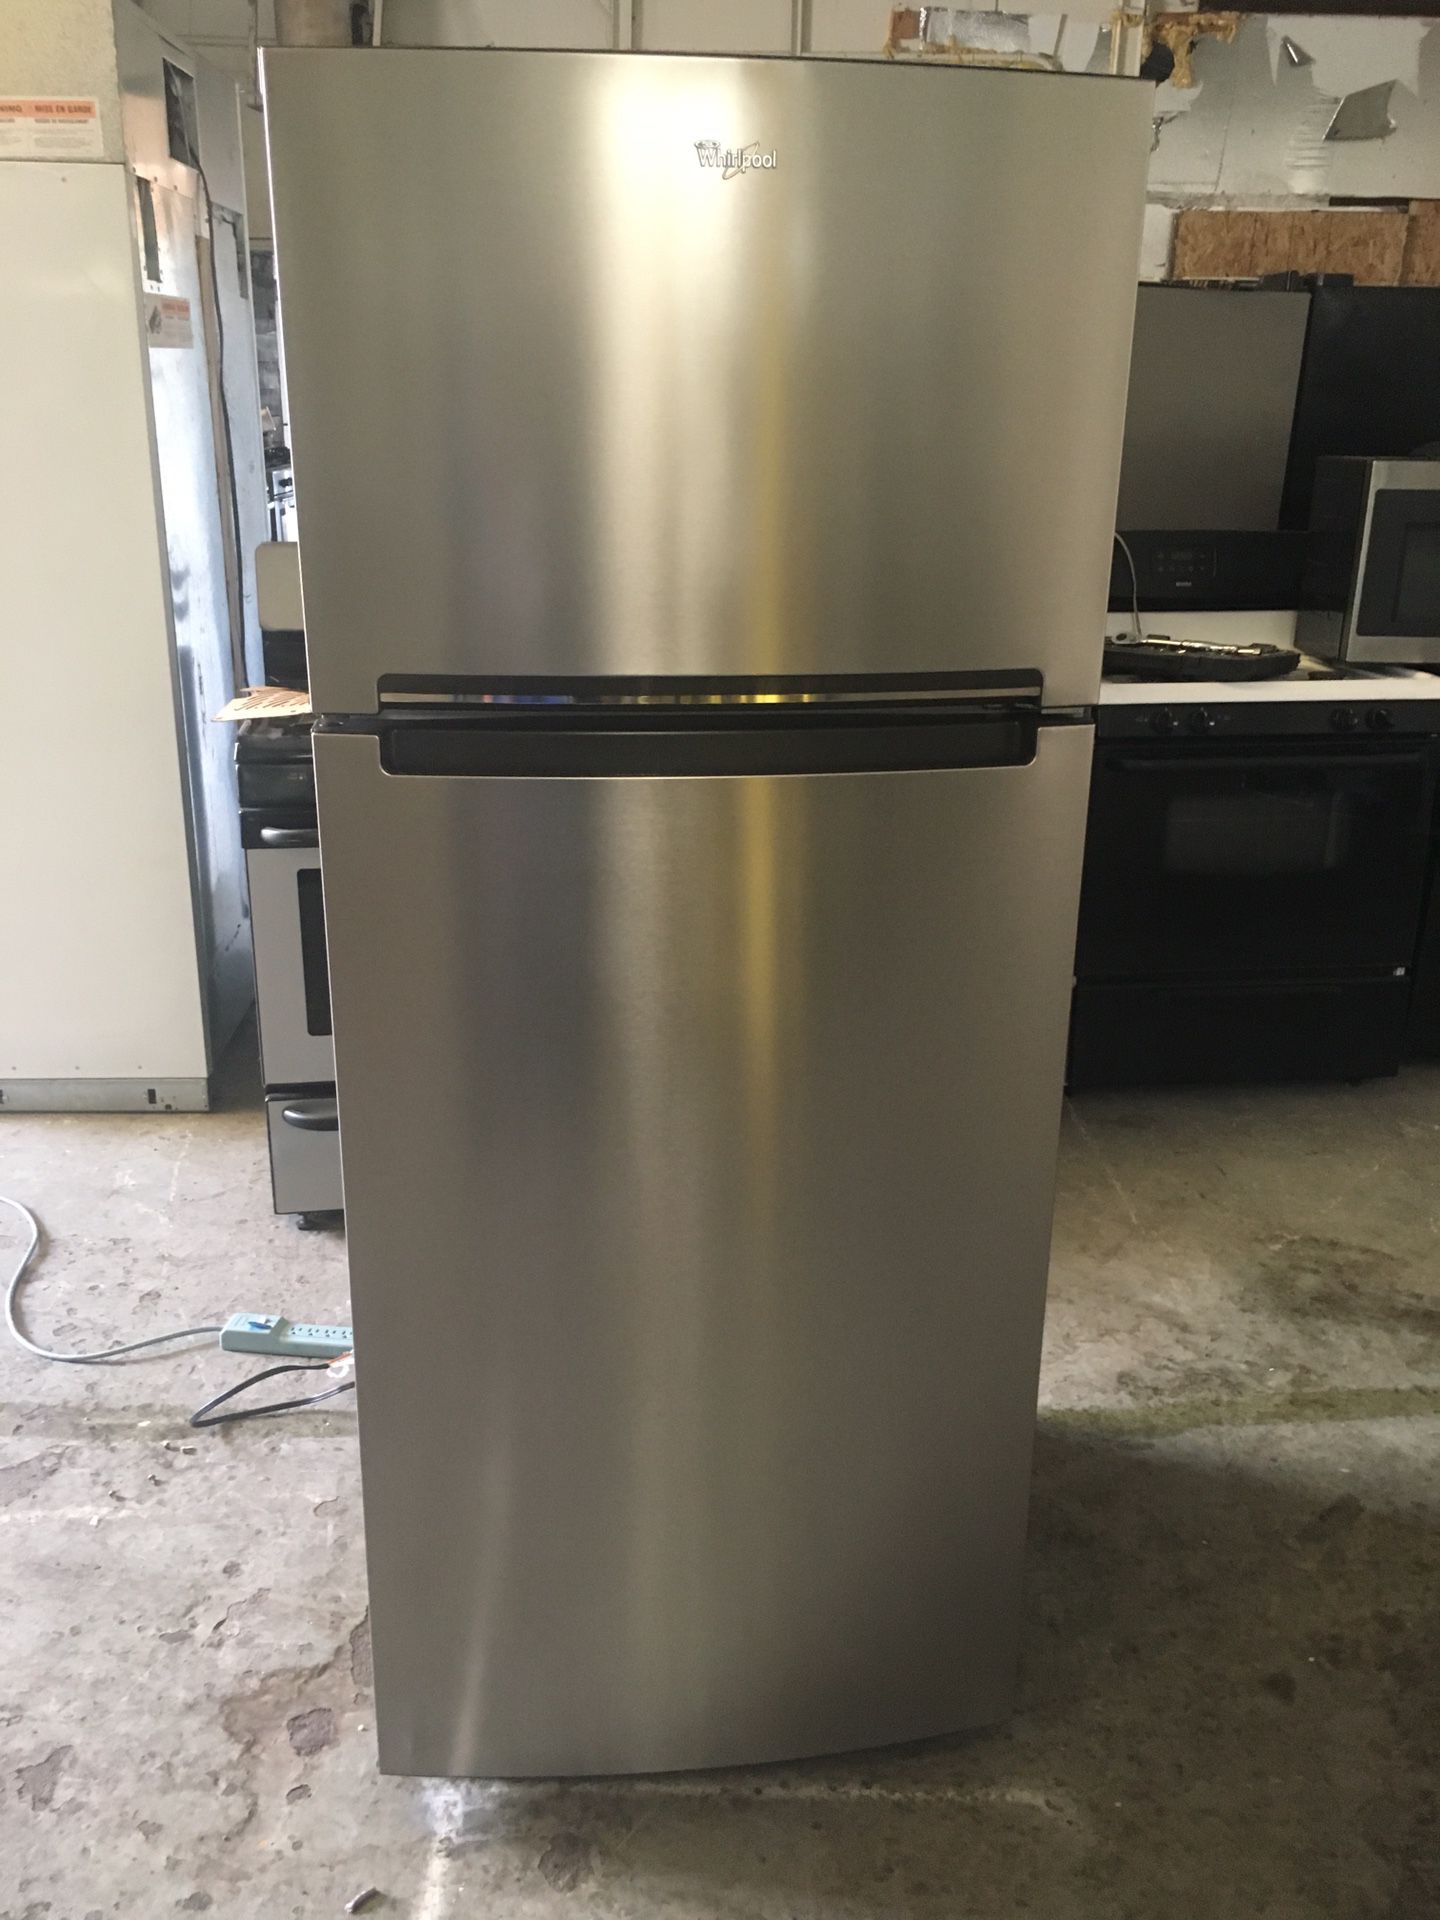 Refrigerator brand whirlpool everything is good working condition 90 days warranty delivery and installation